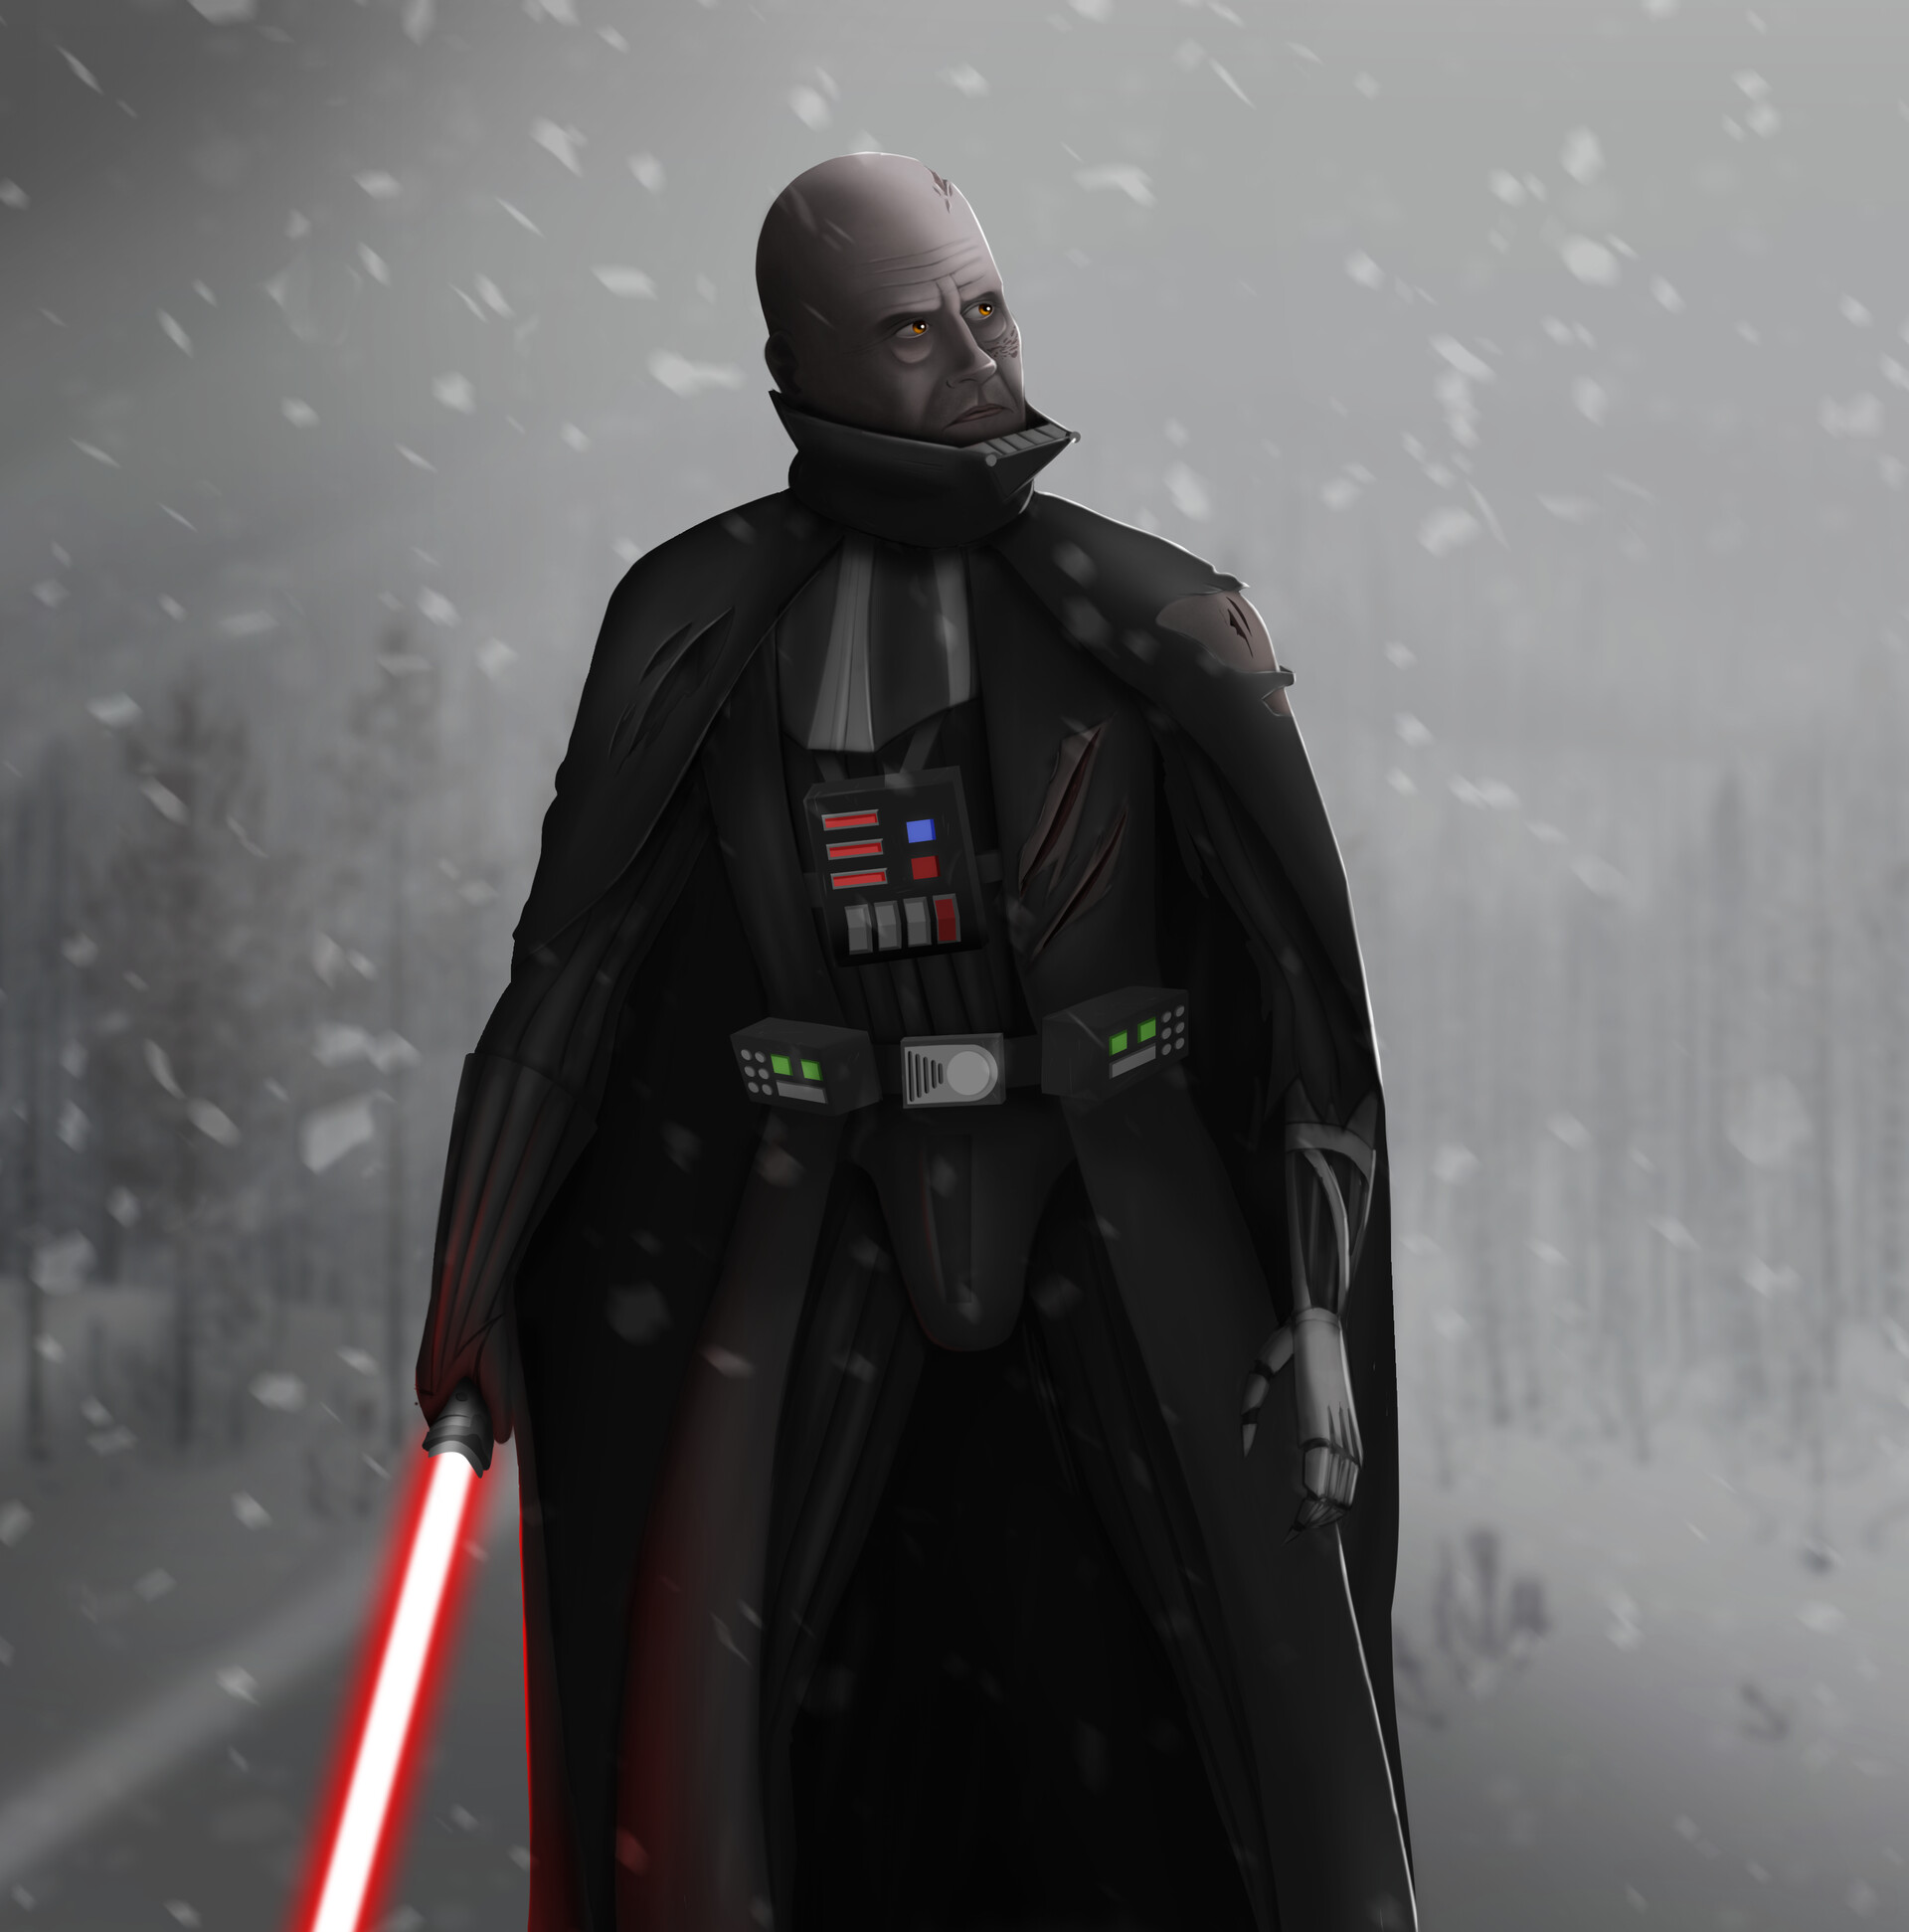 Artstation Darth Vader Without The Helmet By Luiz Henrique Franco Luiz Henrique Franco Guerra